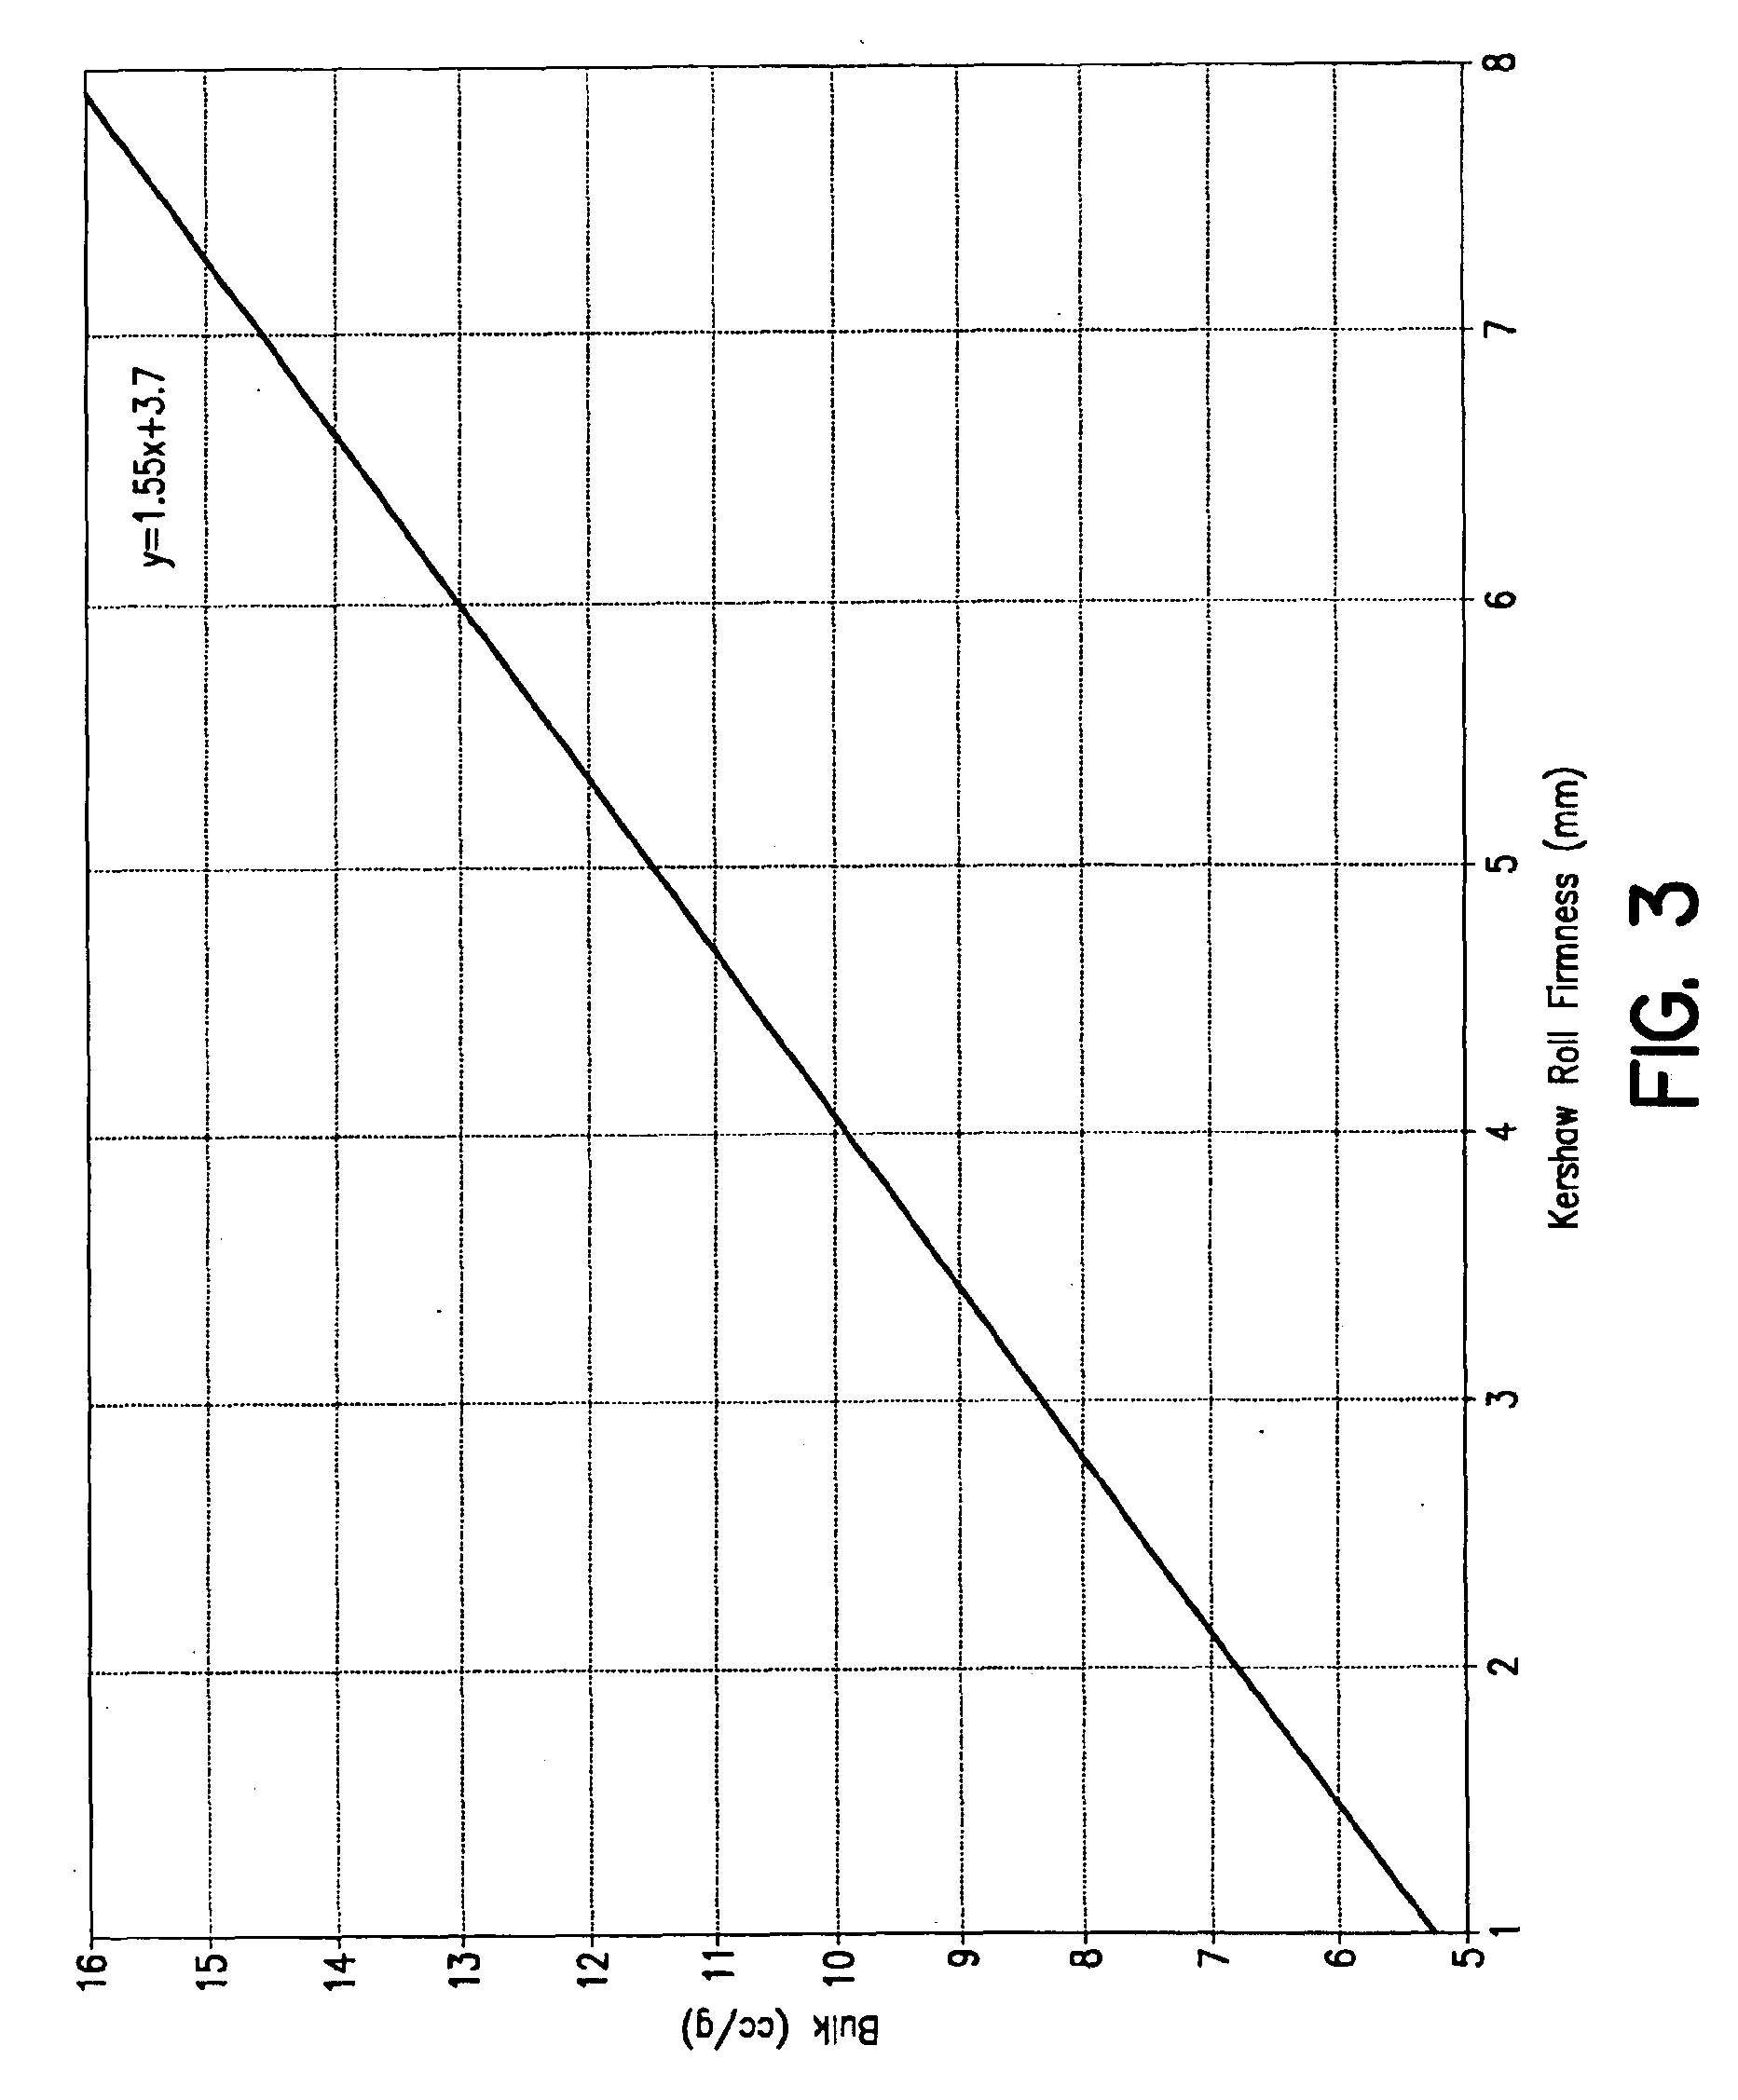 Embossed tissue product with improved bulk properties